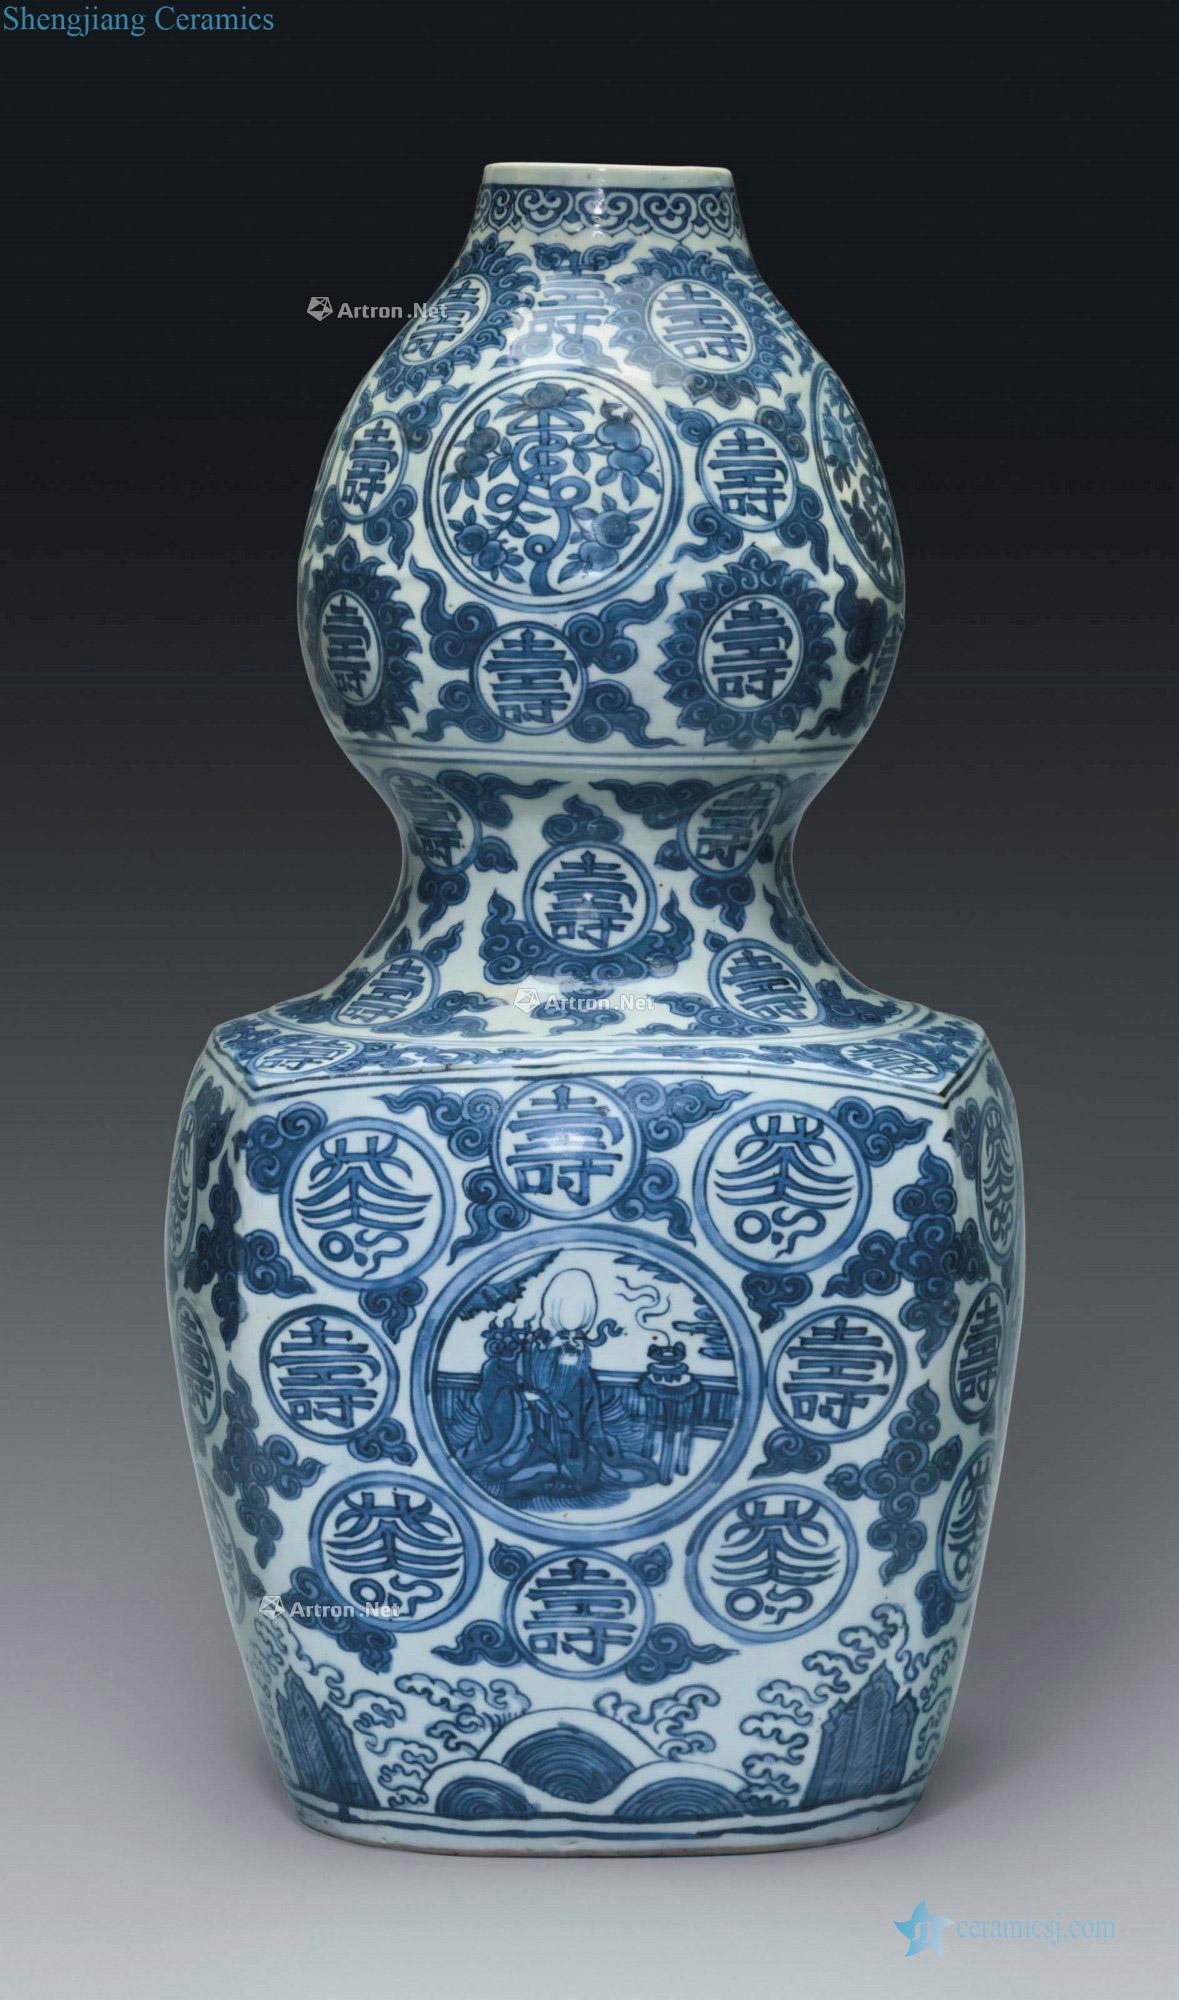 WANLI PERIOD (1573 ~ 1619) A LARGE BLUE AND WHITE DOUBLE - GOURD VASE